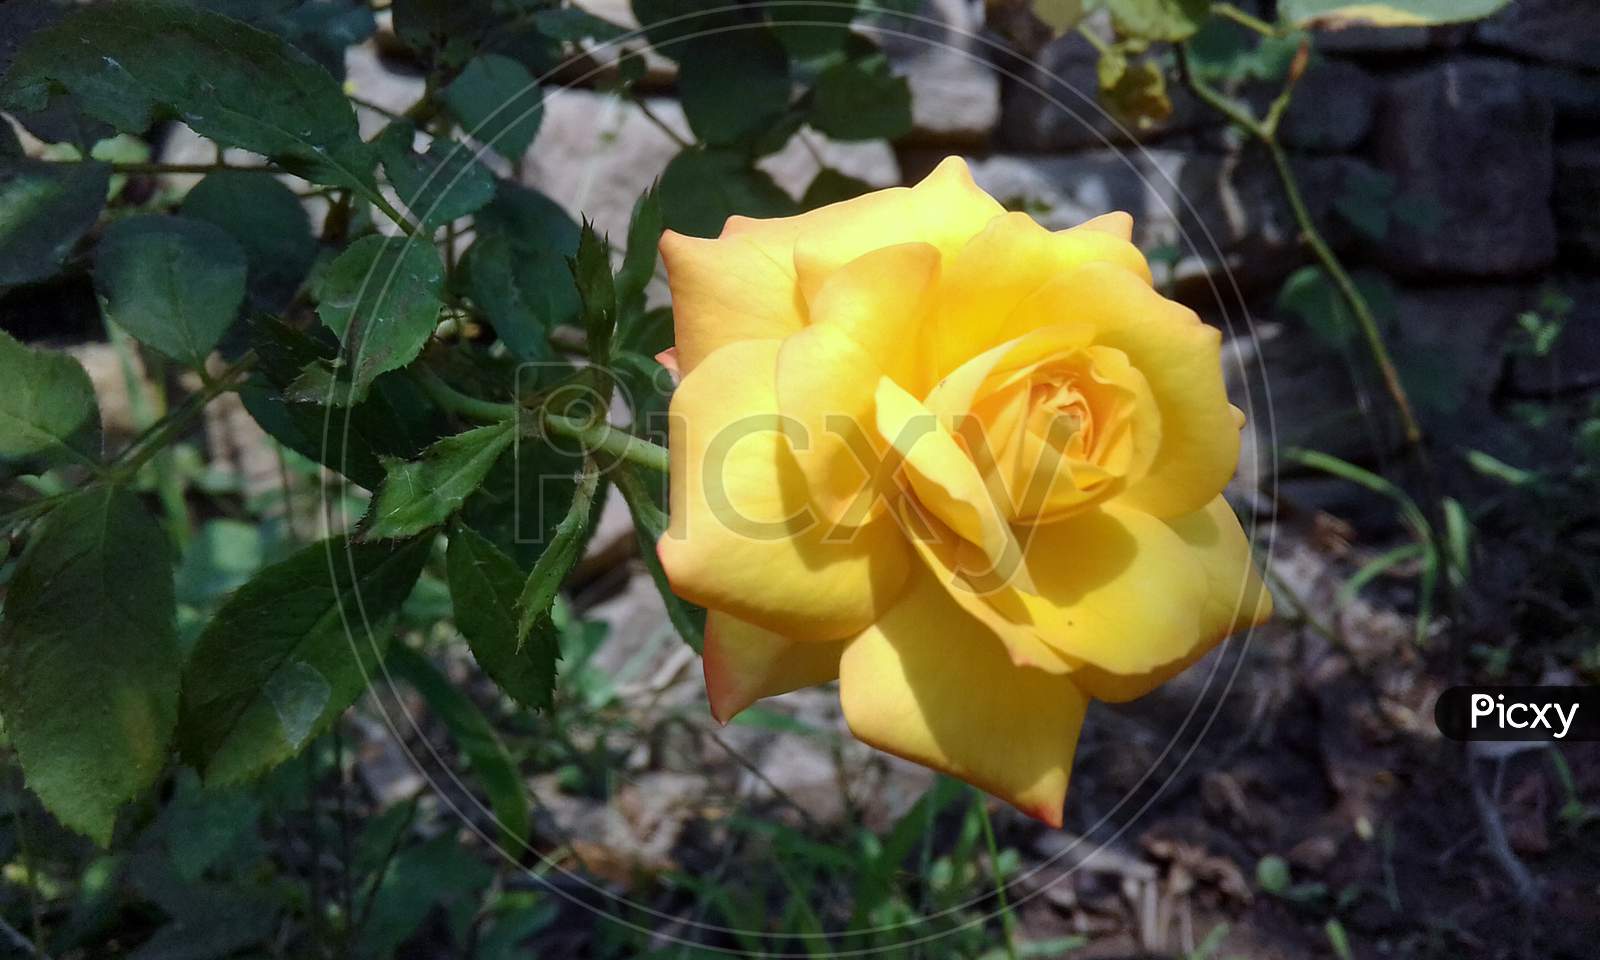 roses of different color(Pink white and yellow)